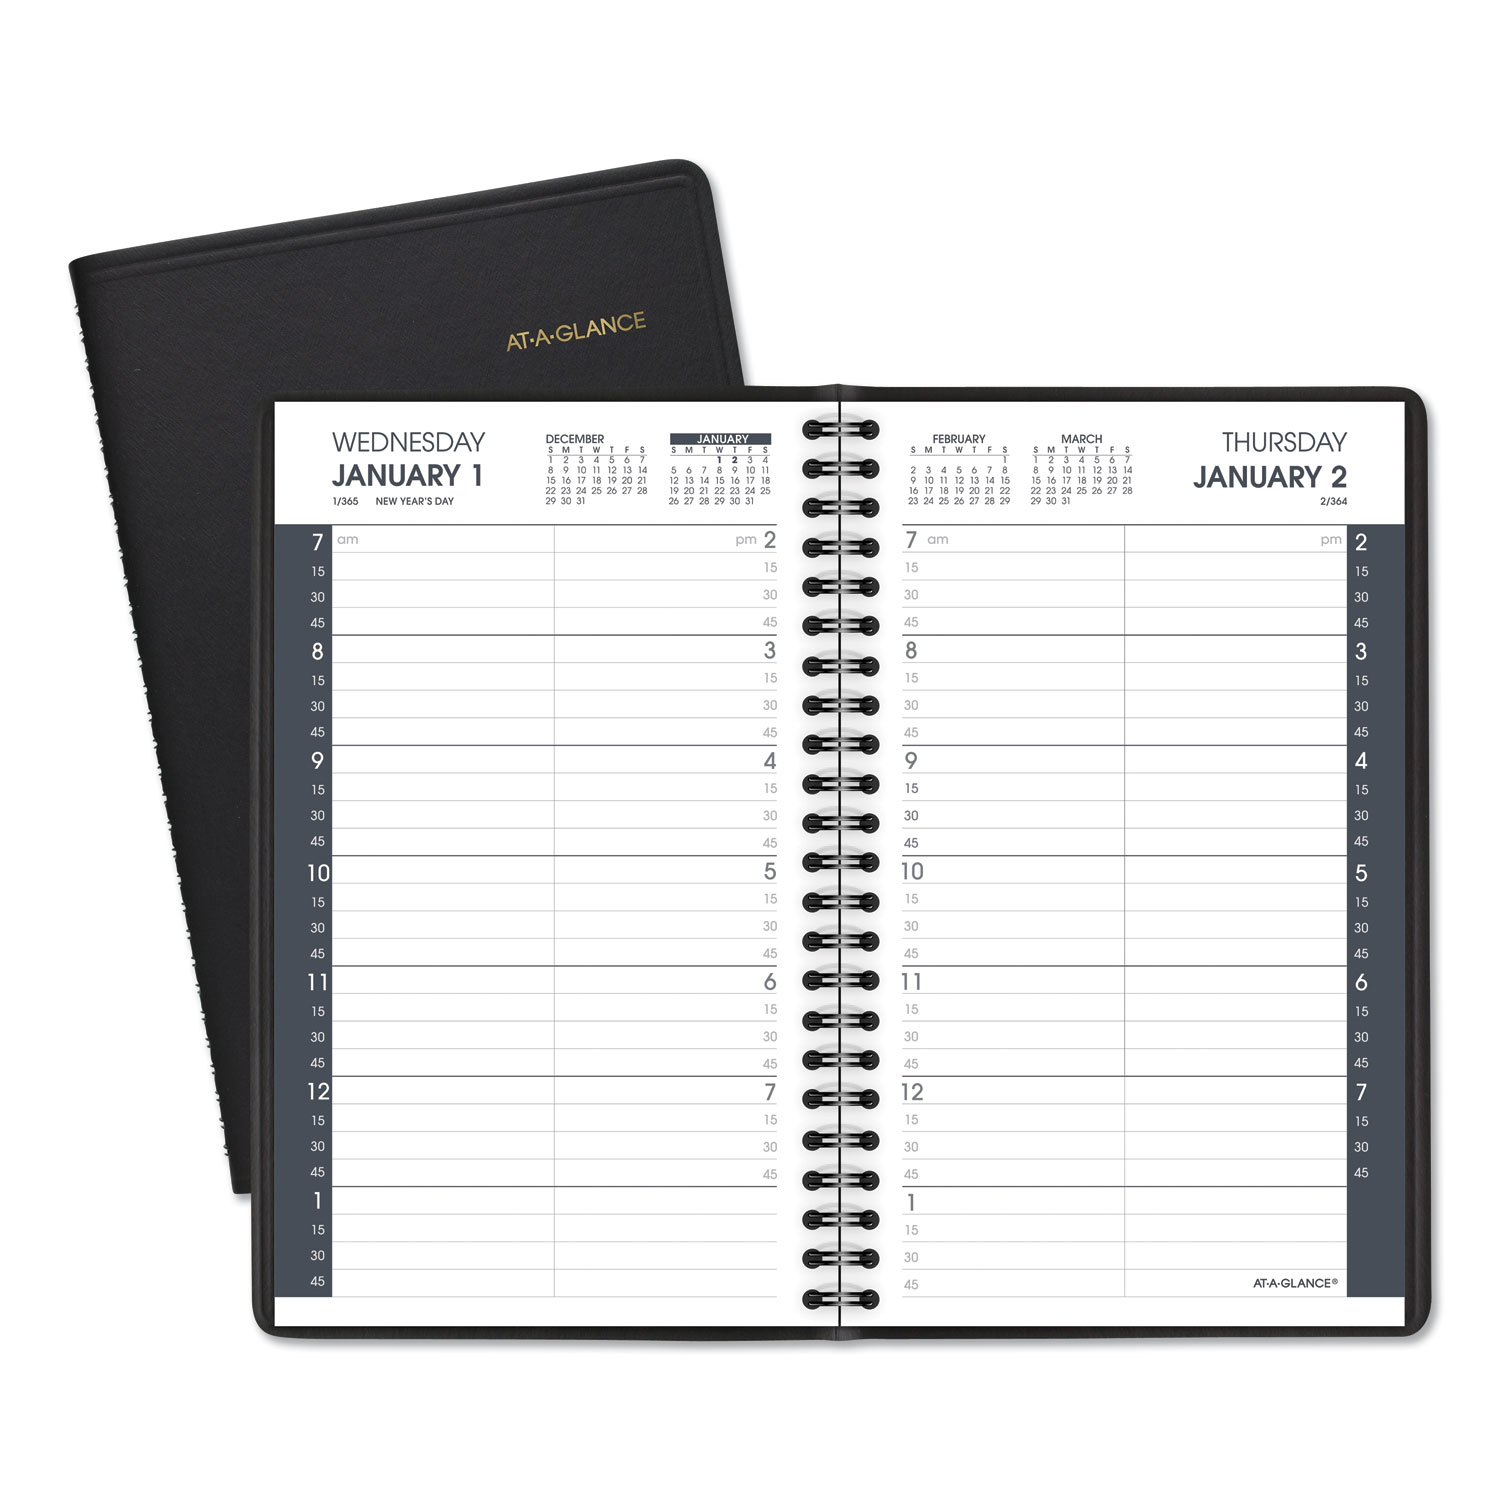 AAG7080005 At-A-Glance Daily Appointment Book with 15-Minute Appoint - Zuma